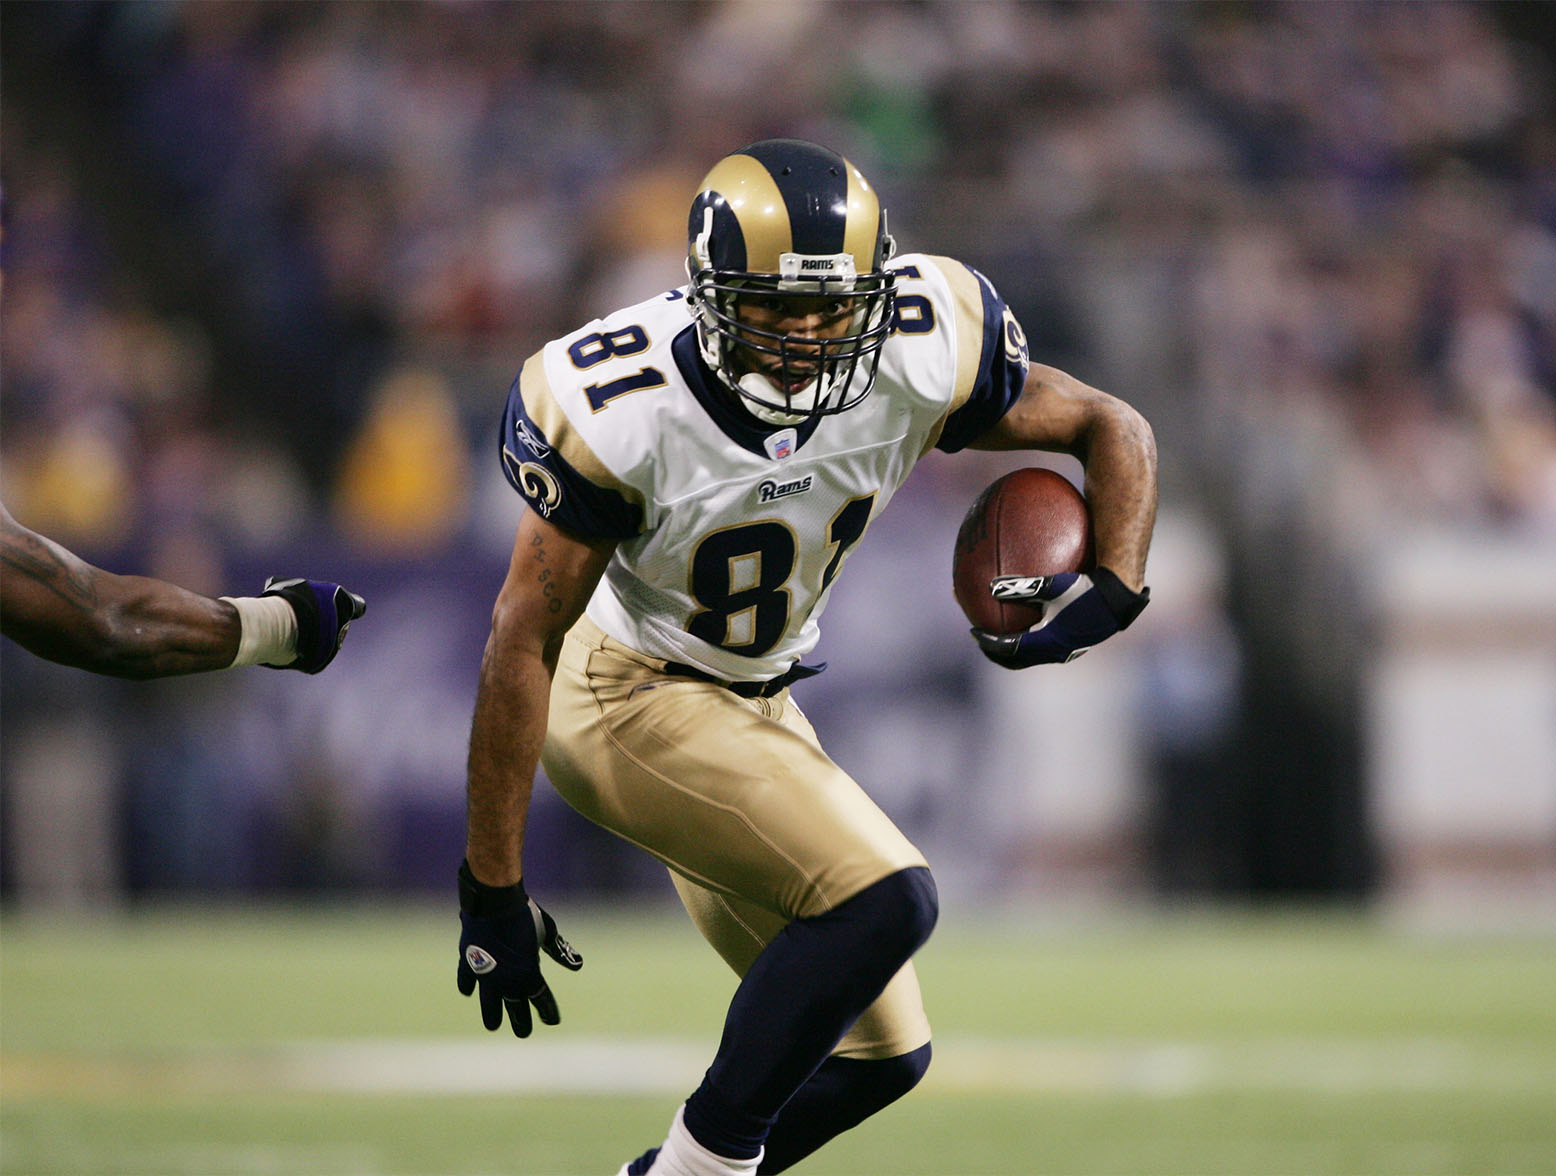 MINNEAPOLIS - DECEMBER 11: Wide receiver Torry Holt #81 of the St. Louis Rams carries the ball against the Minnesota Vikings on December 11, 2005 at the Metrodome in Minneapolis, Minnesota. The Vikings defeated the Rams 27-13. (Photo by Elsa/Getty Images)